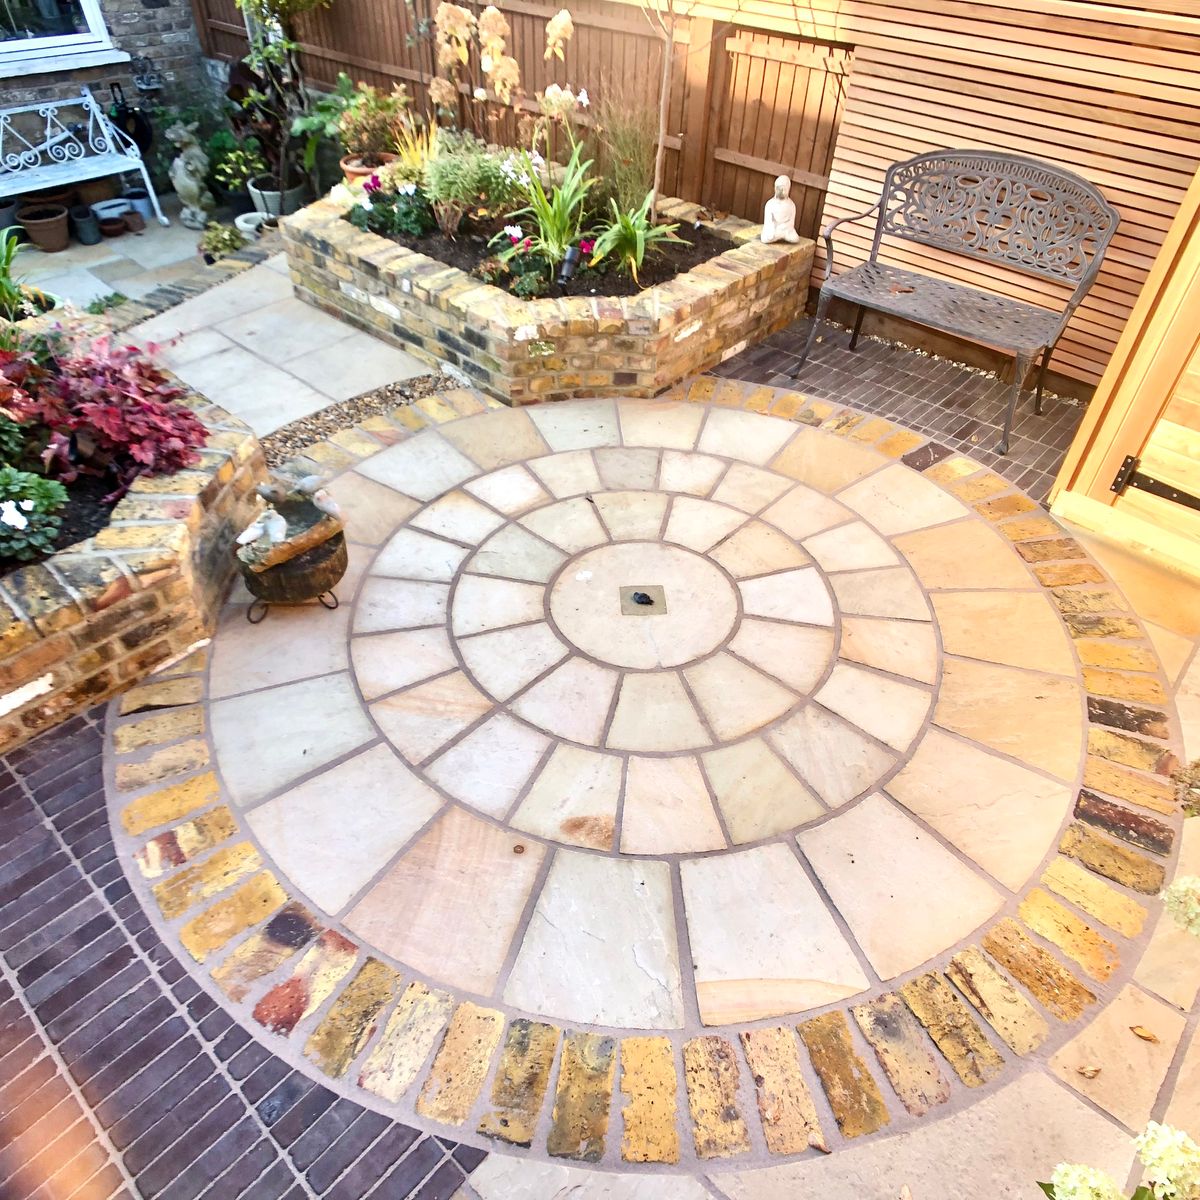 Detail of Circular Sandstone Paving and Brick Planters as part of Beautiful Small Garden Design in Dalston North London